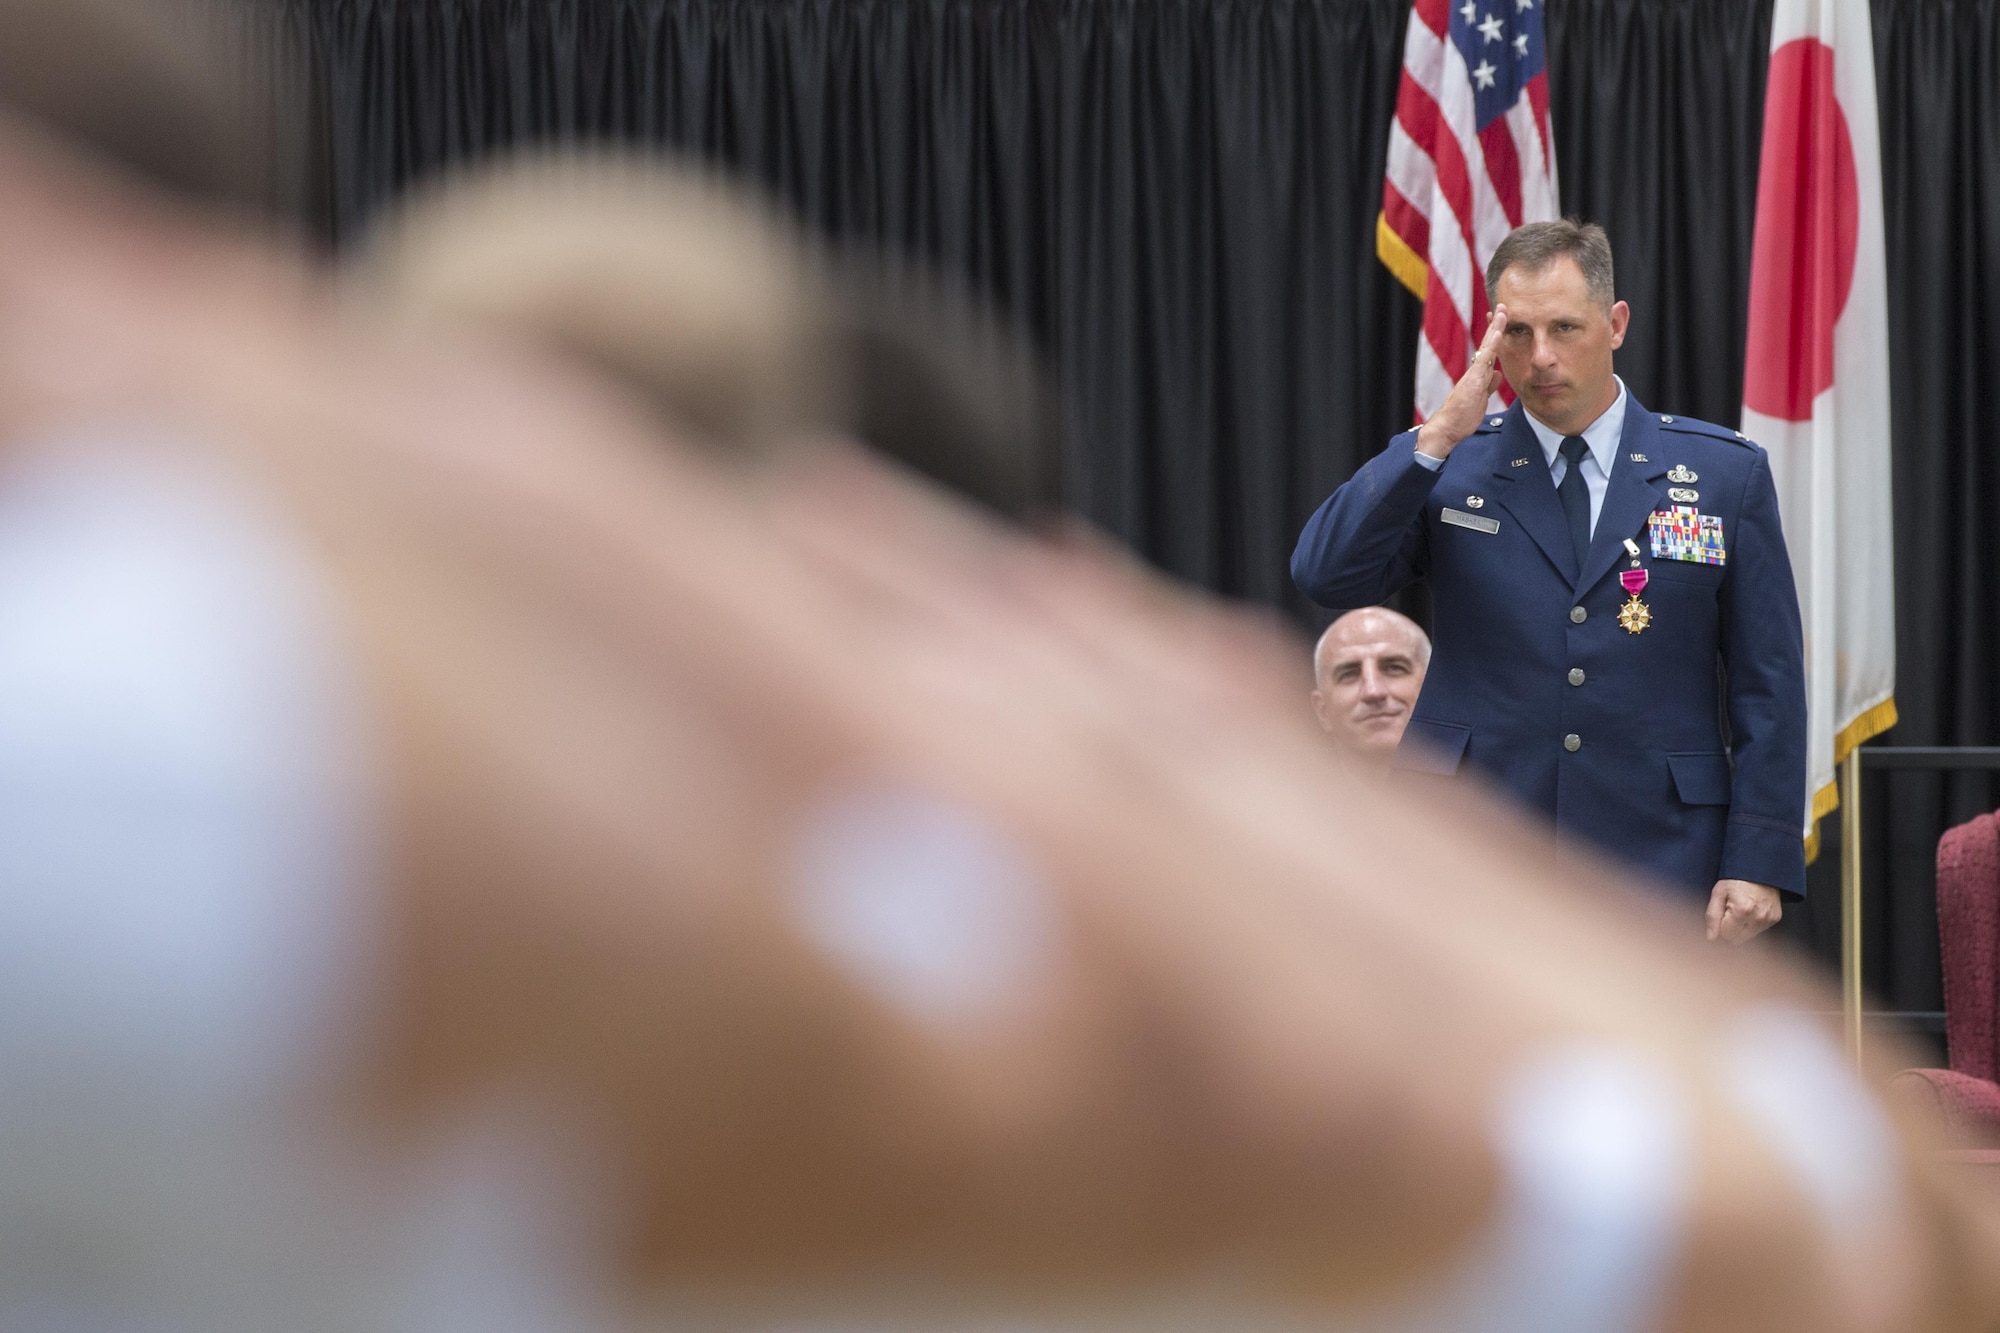 Col. Scott Maskery, 374th Mission Support Group commander, renders his final salute as commander during a change of command ceremony at Yokota Air Base, Japan, Aug. 8, 2016. (U.S. Air Force photo by Yasuo Osakabe/Released)